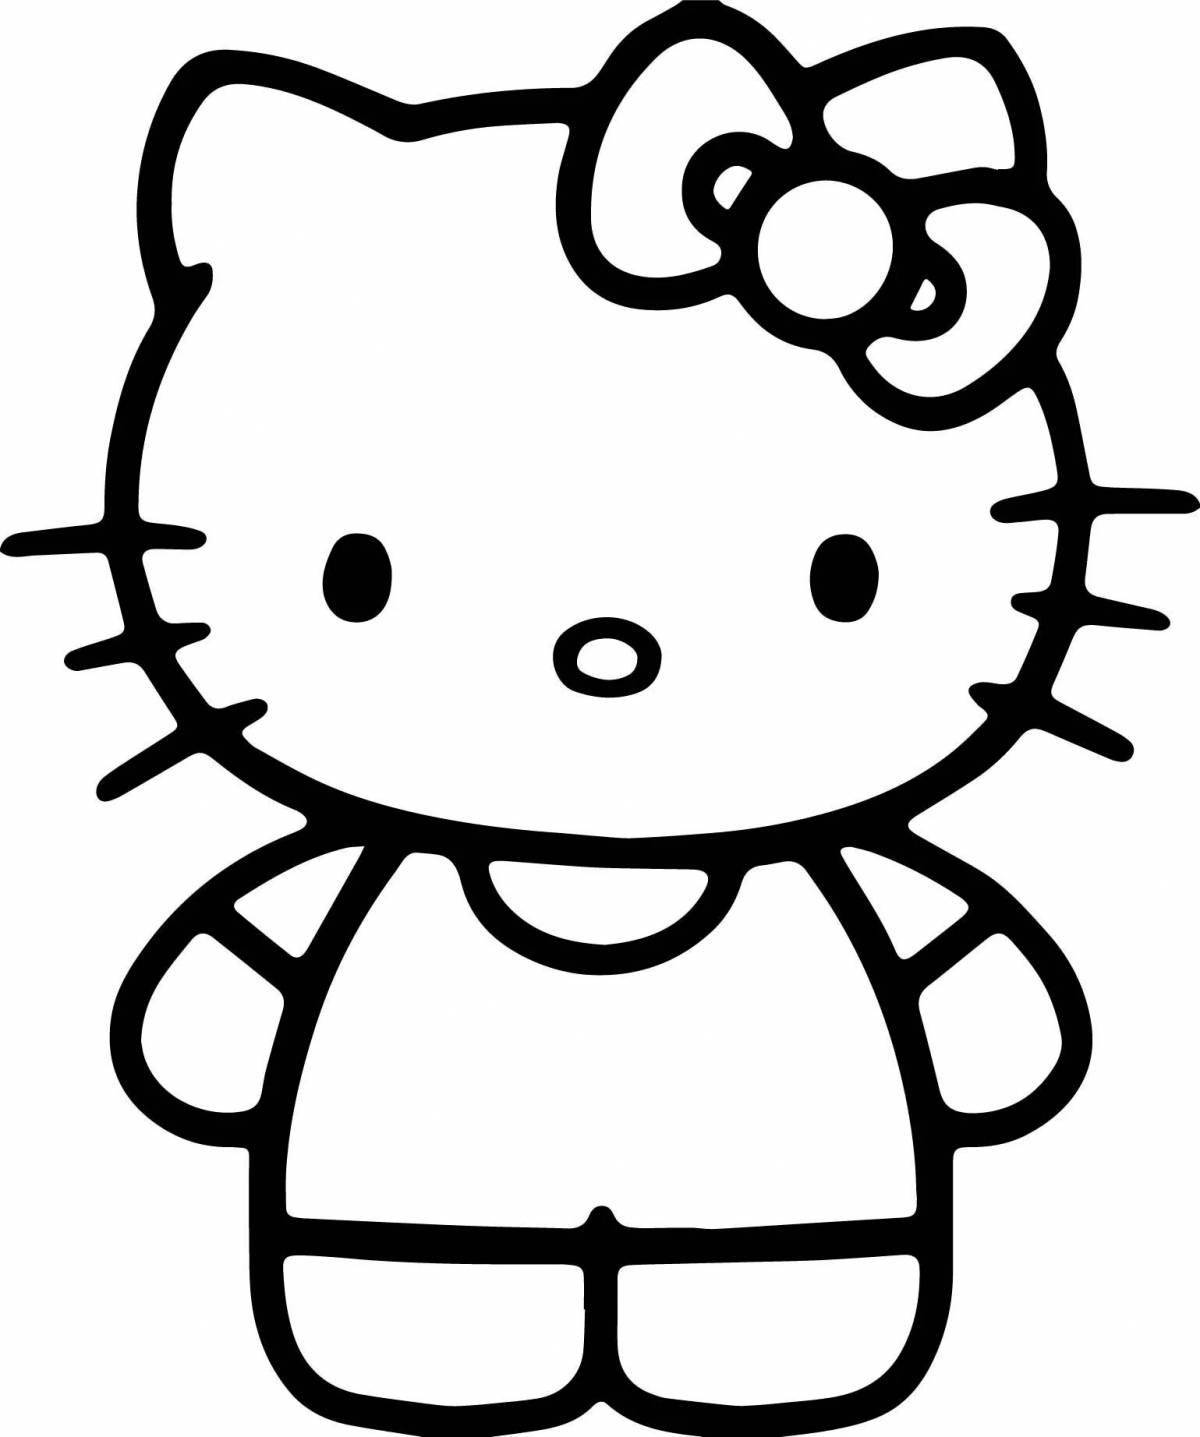 Milady from hello kitty #4